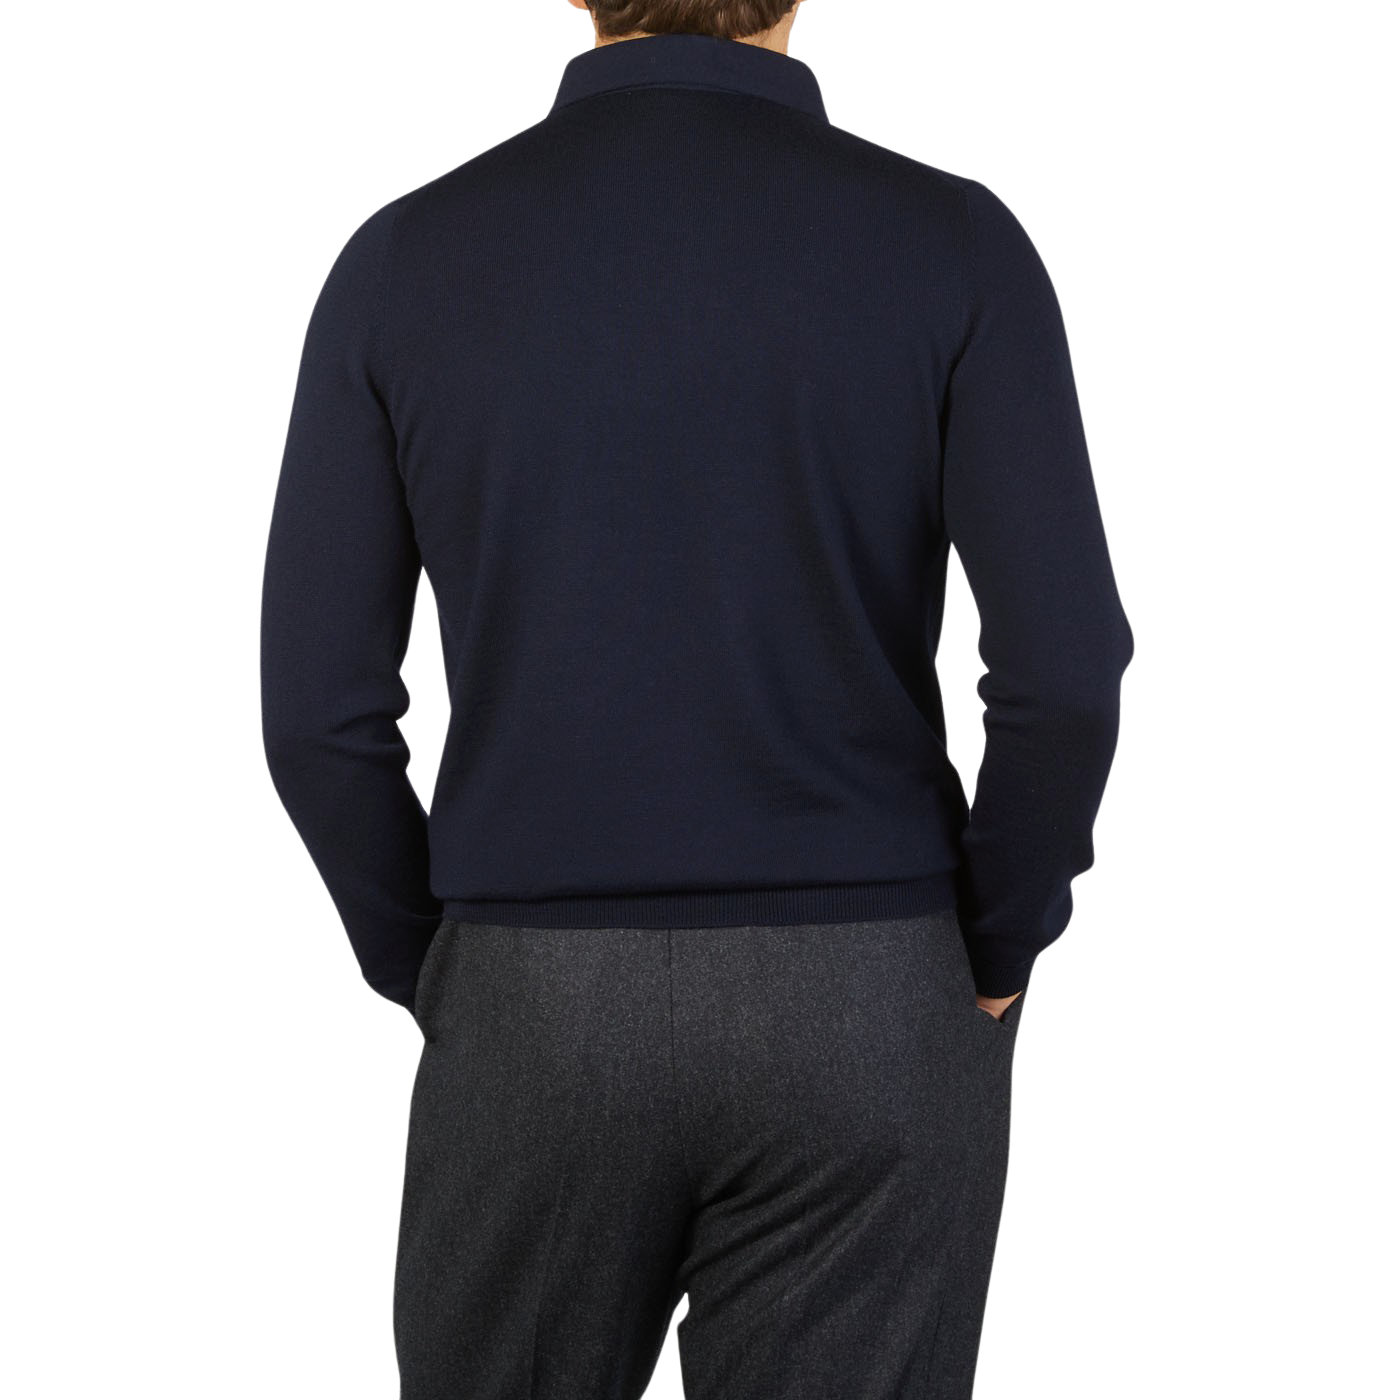 The back view of a man wearing a Gran Sasso Navy Merino Wool One-Piece Collar Polo Shirt.